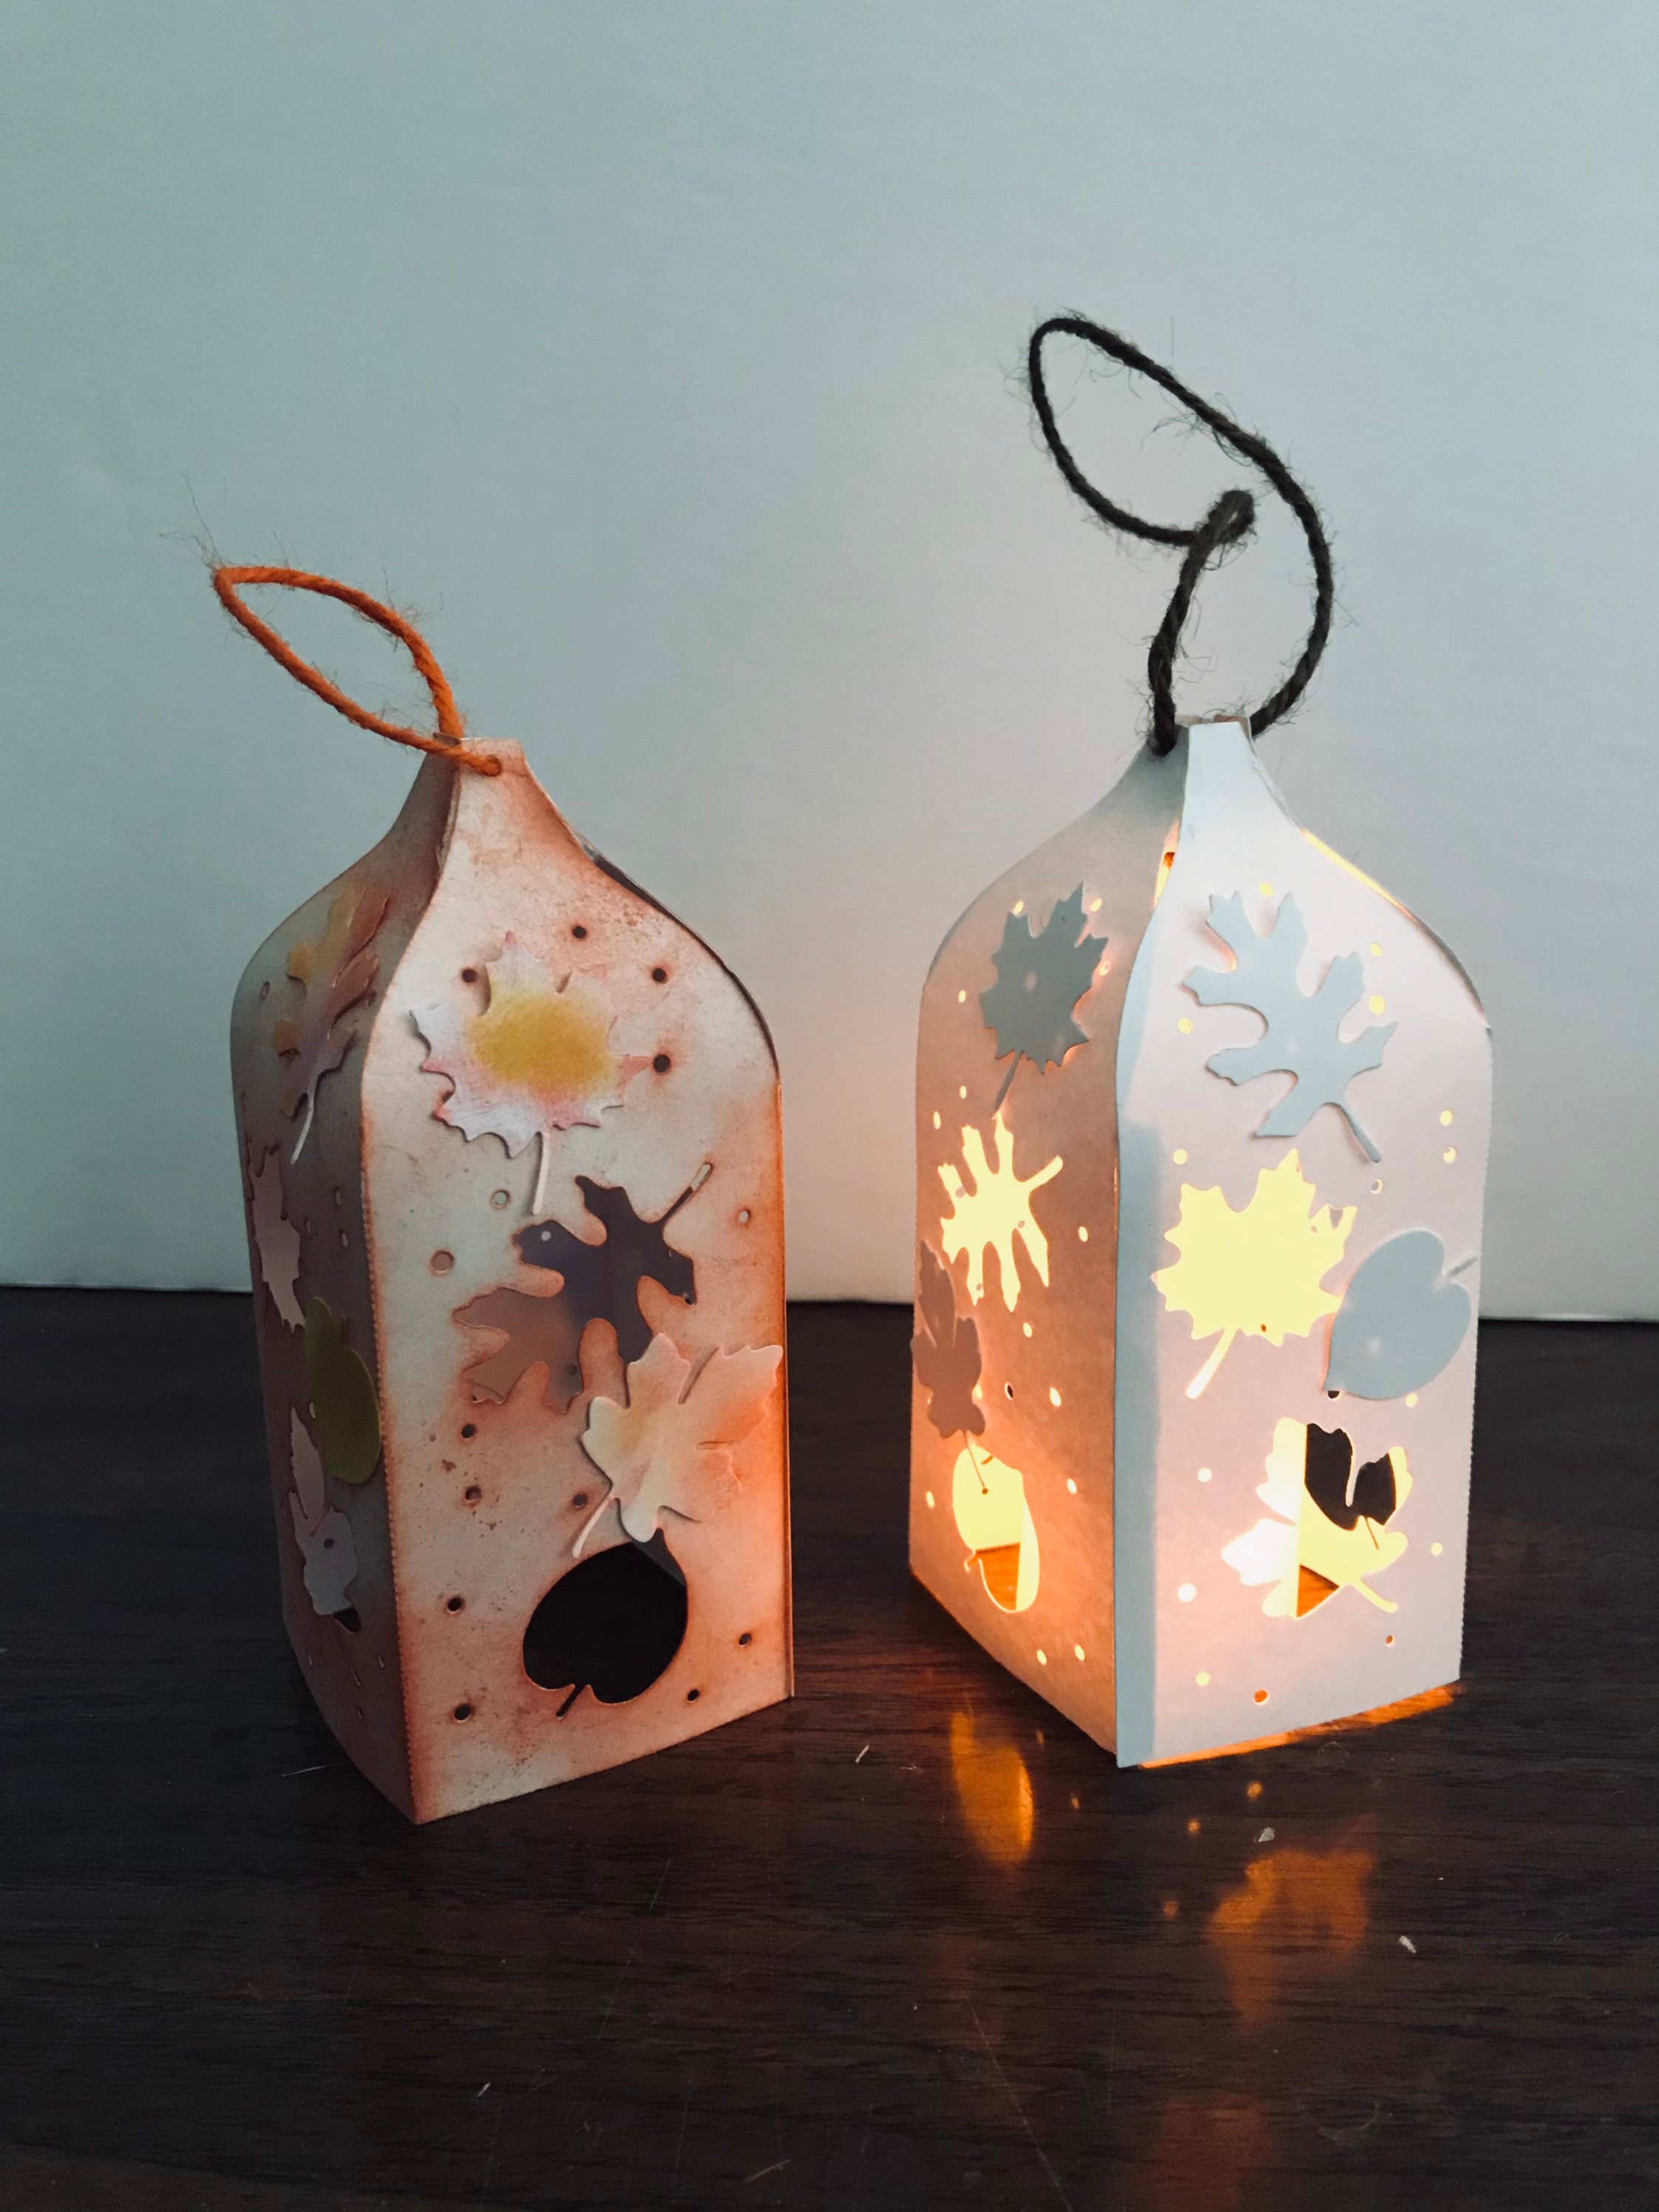 How to make very easy paper Lantern for kids,easy kids paper crafts 